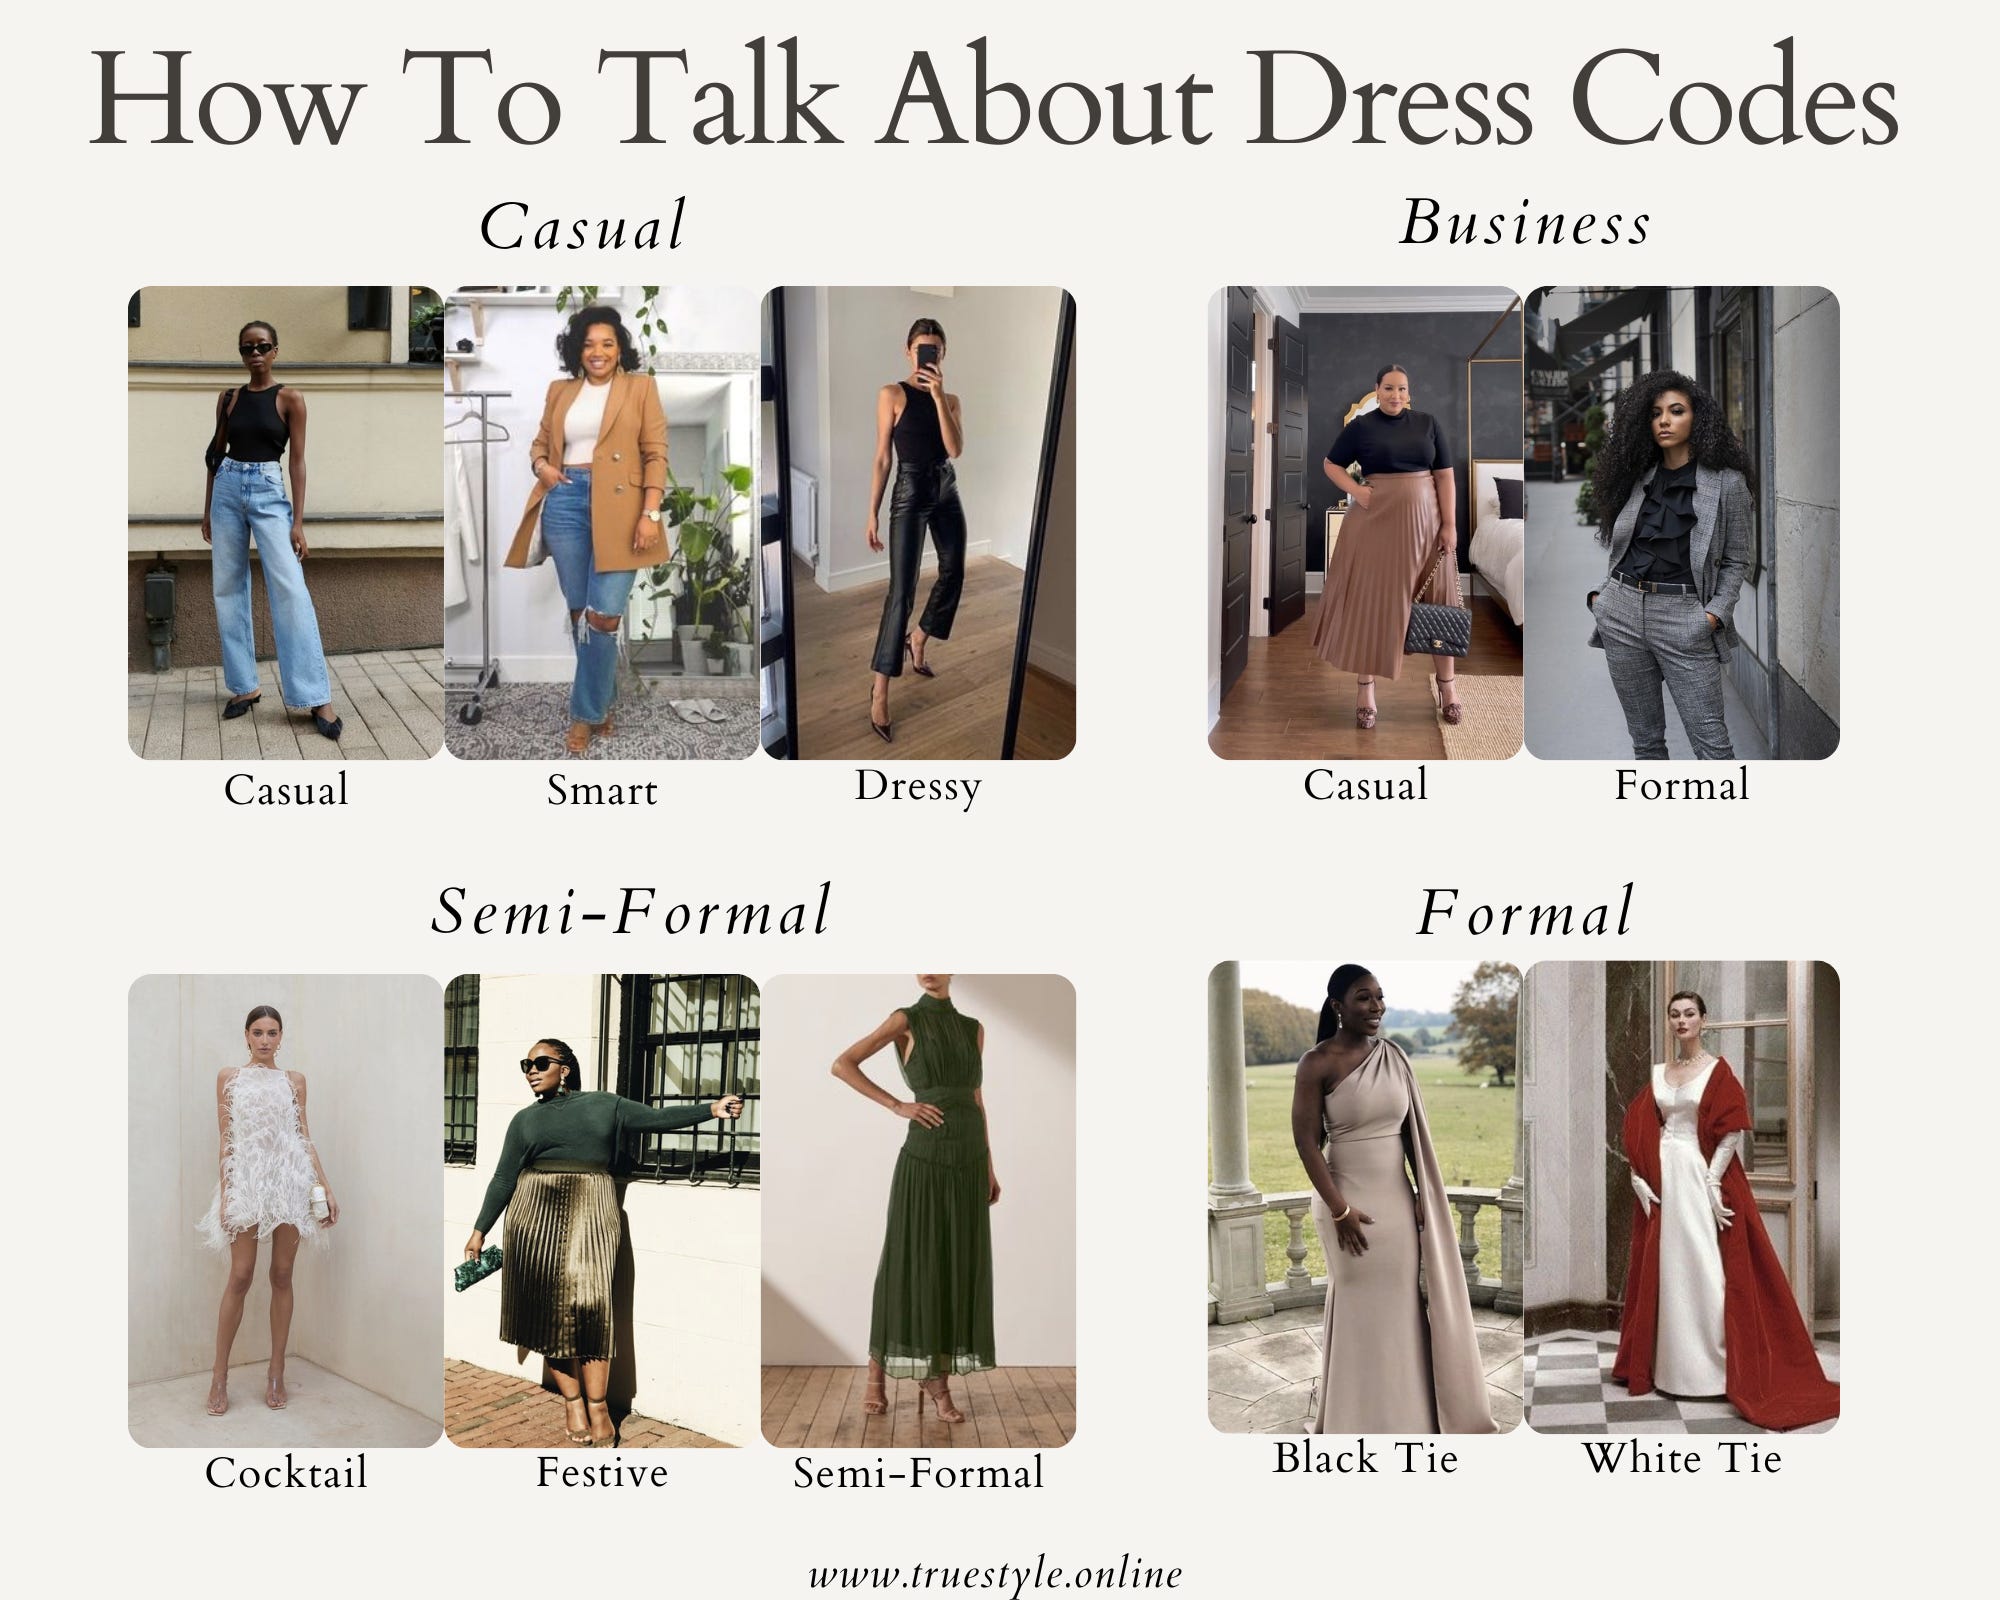 Dress Codes 101: A Guide To What Dress Codes Really Mean in 2021